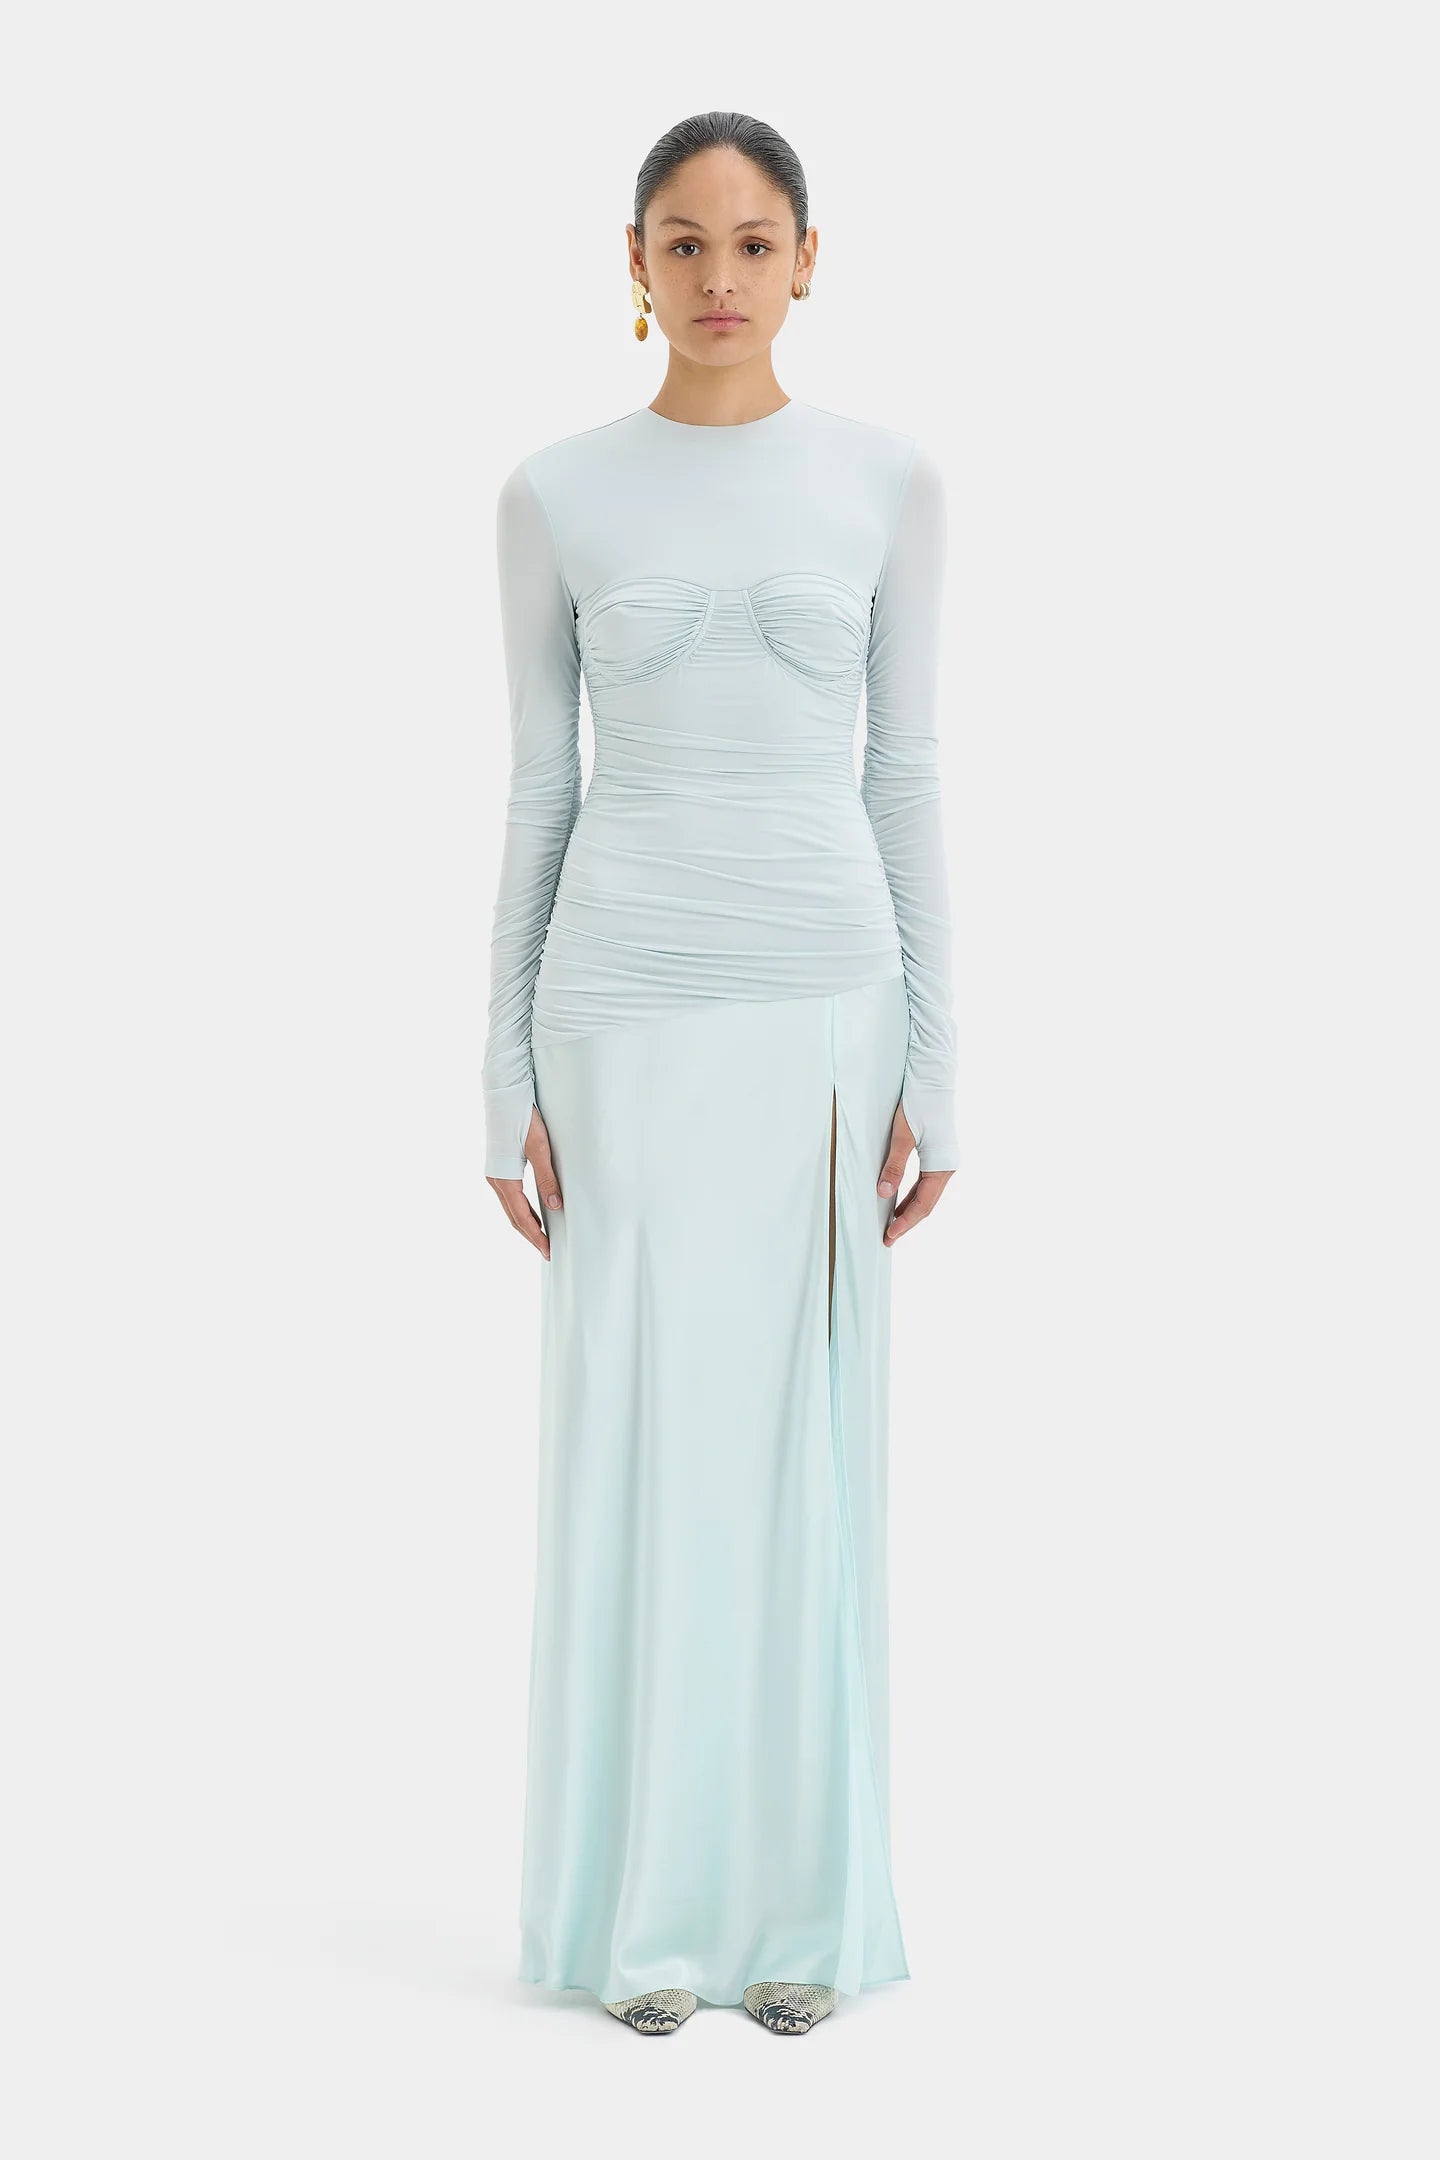 SIR. Alessia Draped Gown - Ice Blue